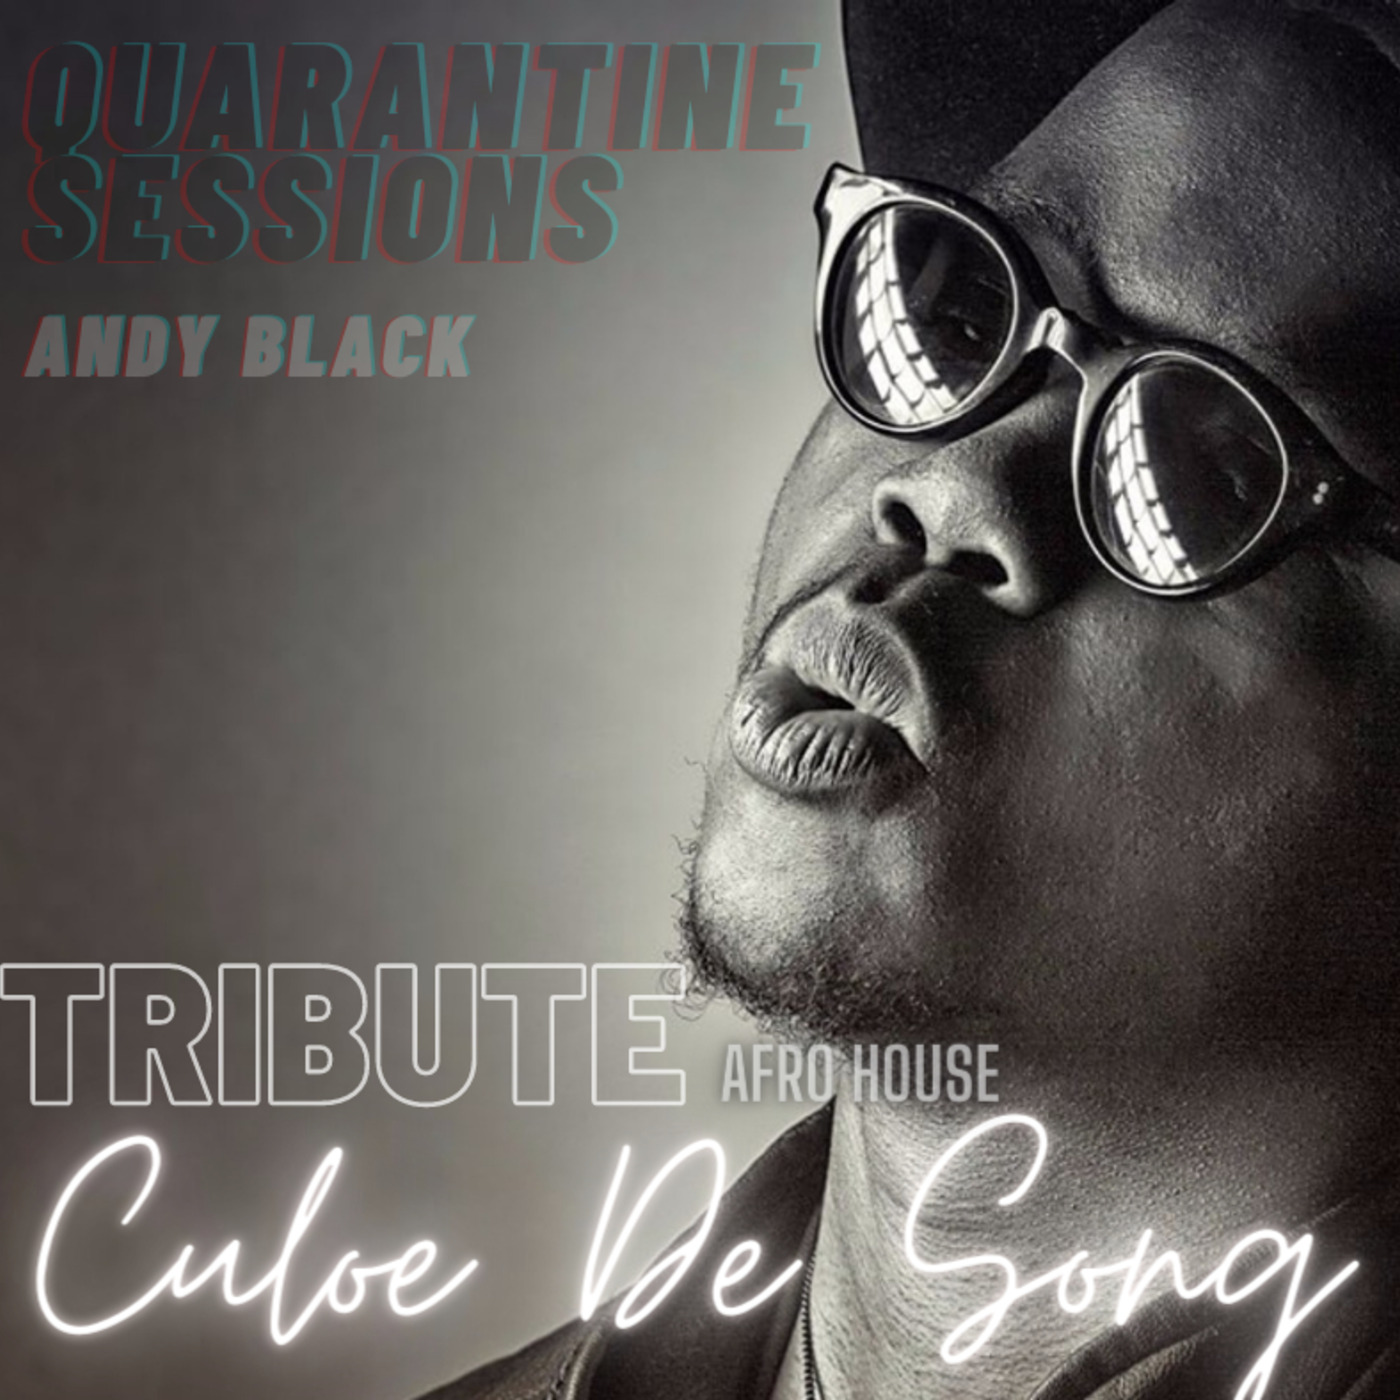 Andy Black - #QuarantineSessions (Afro House - Tribute to Culoe De Song) Episode 63